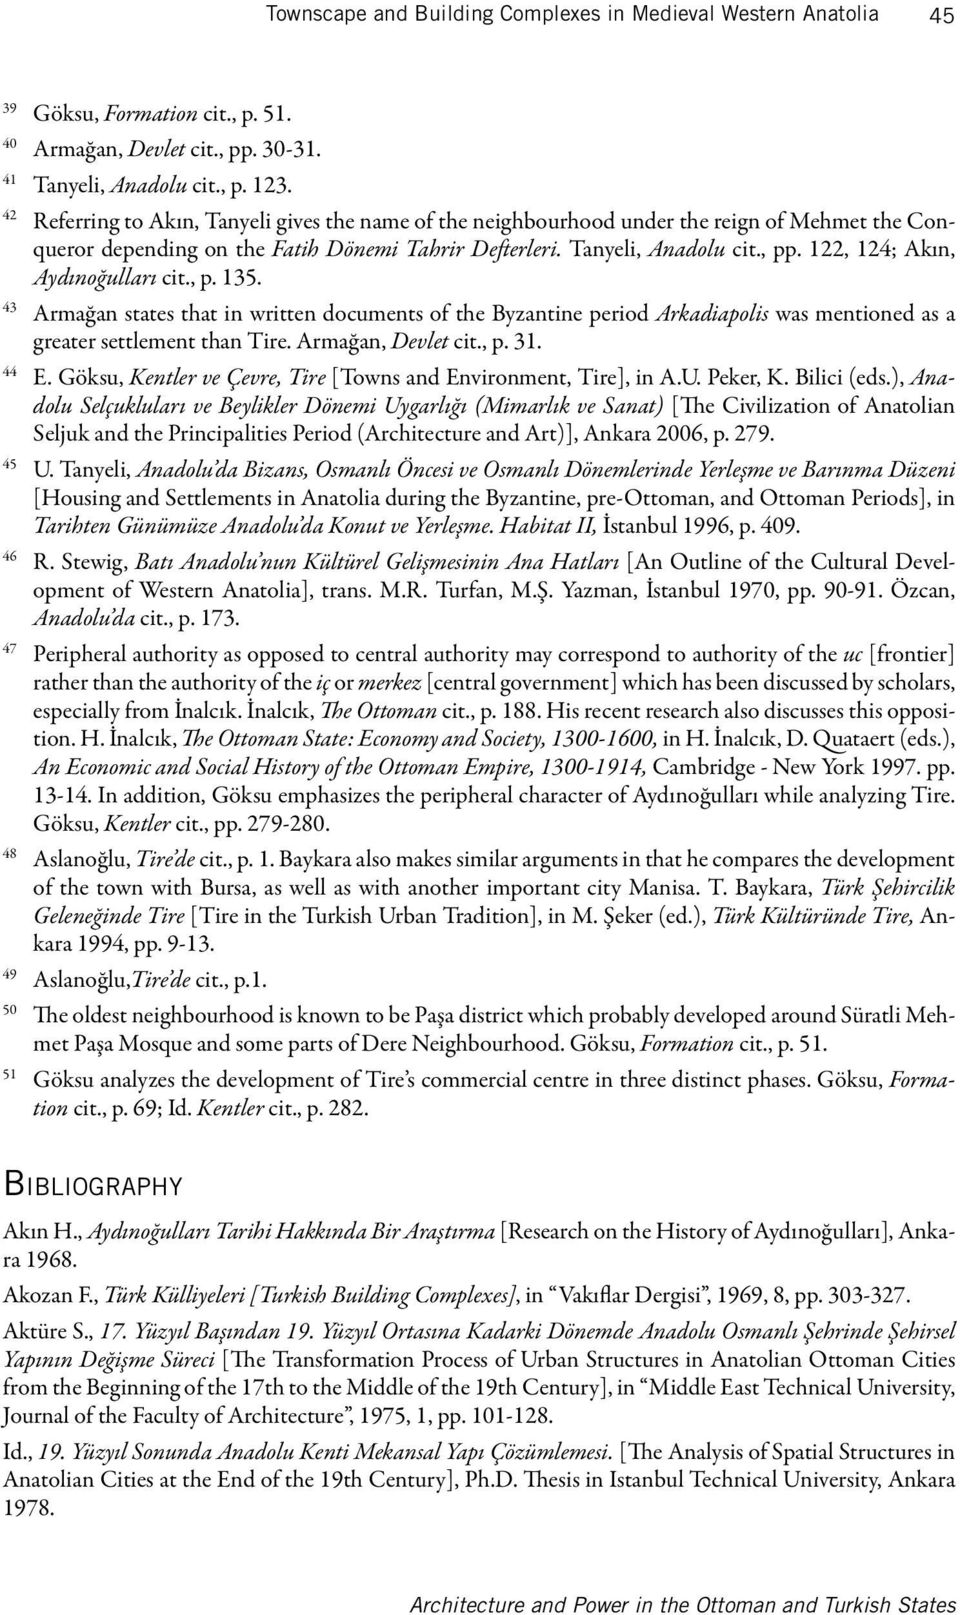 122, 124; Akın, Aydınoğulları cit., p. 135. 43 Armağan states that in written documents of the Byzantine period Arkadiapolis was mentioned as a greater settlement than Tire. Armağan, Devlet cit., p. 31.